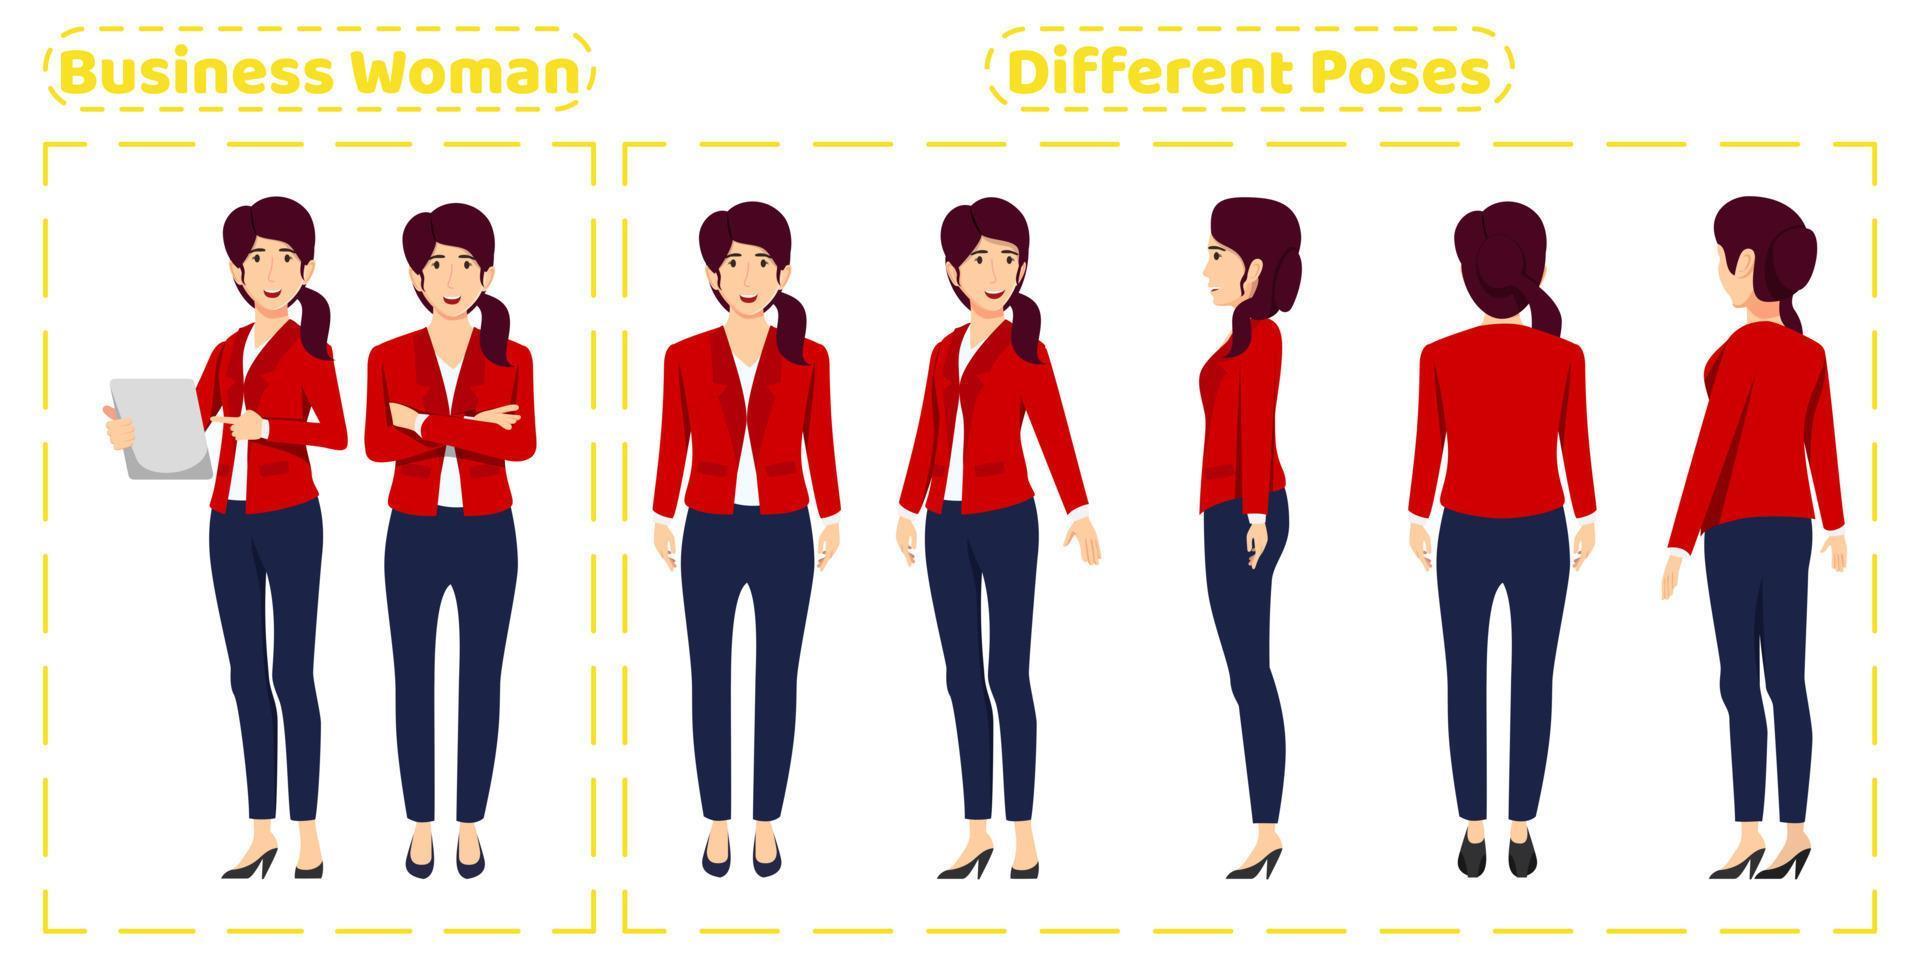 Cute business woman character set wearing cute business outfit with different poses front side back view with cheerful facial expressions Animation creation isolated with tablet vector